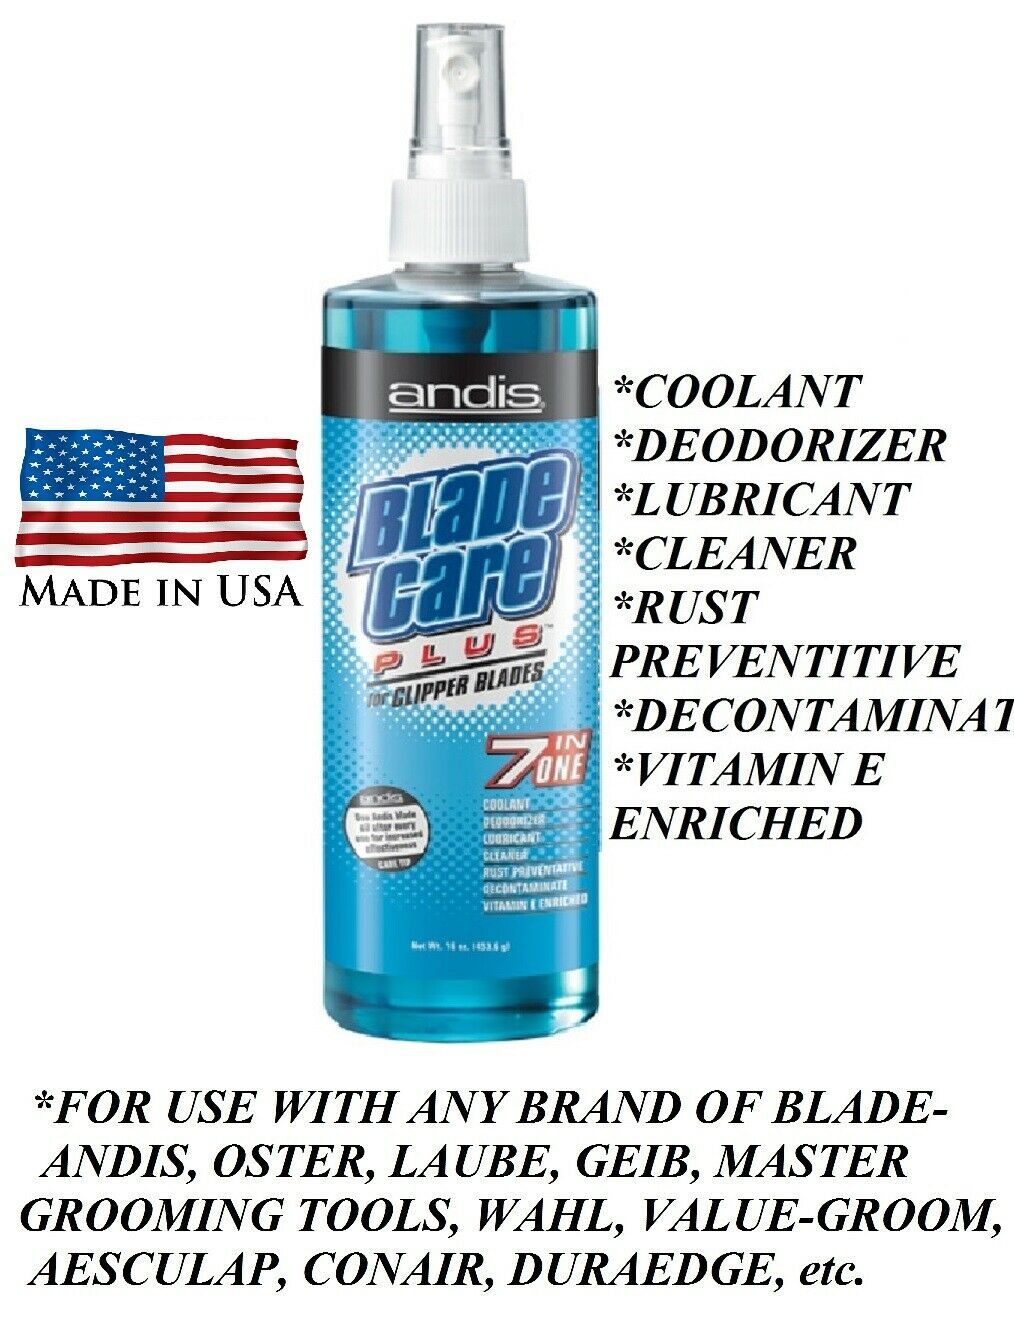 ANDIS 7 in ONE CLIPPER BLADE CARE PLUS Spray Cleaner,Coolant*Also For Geib,Oster